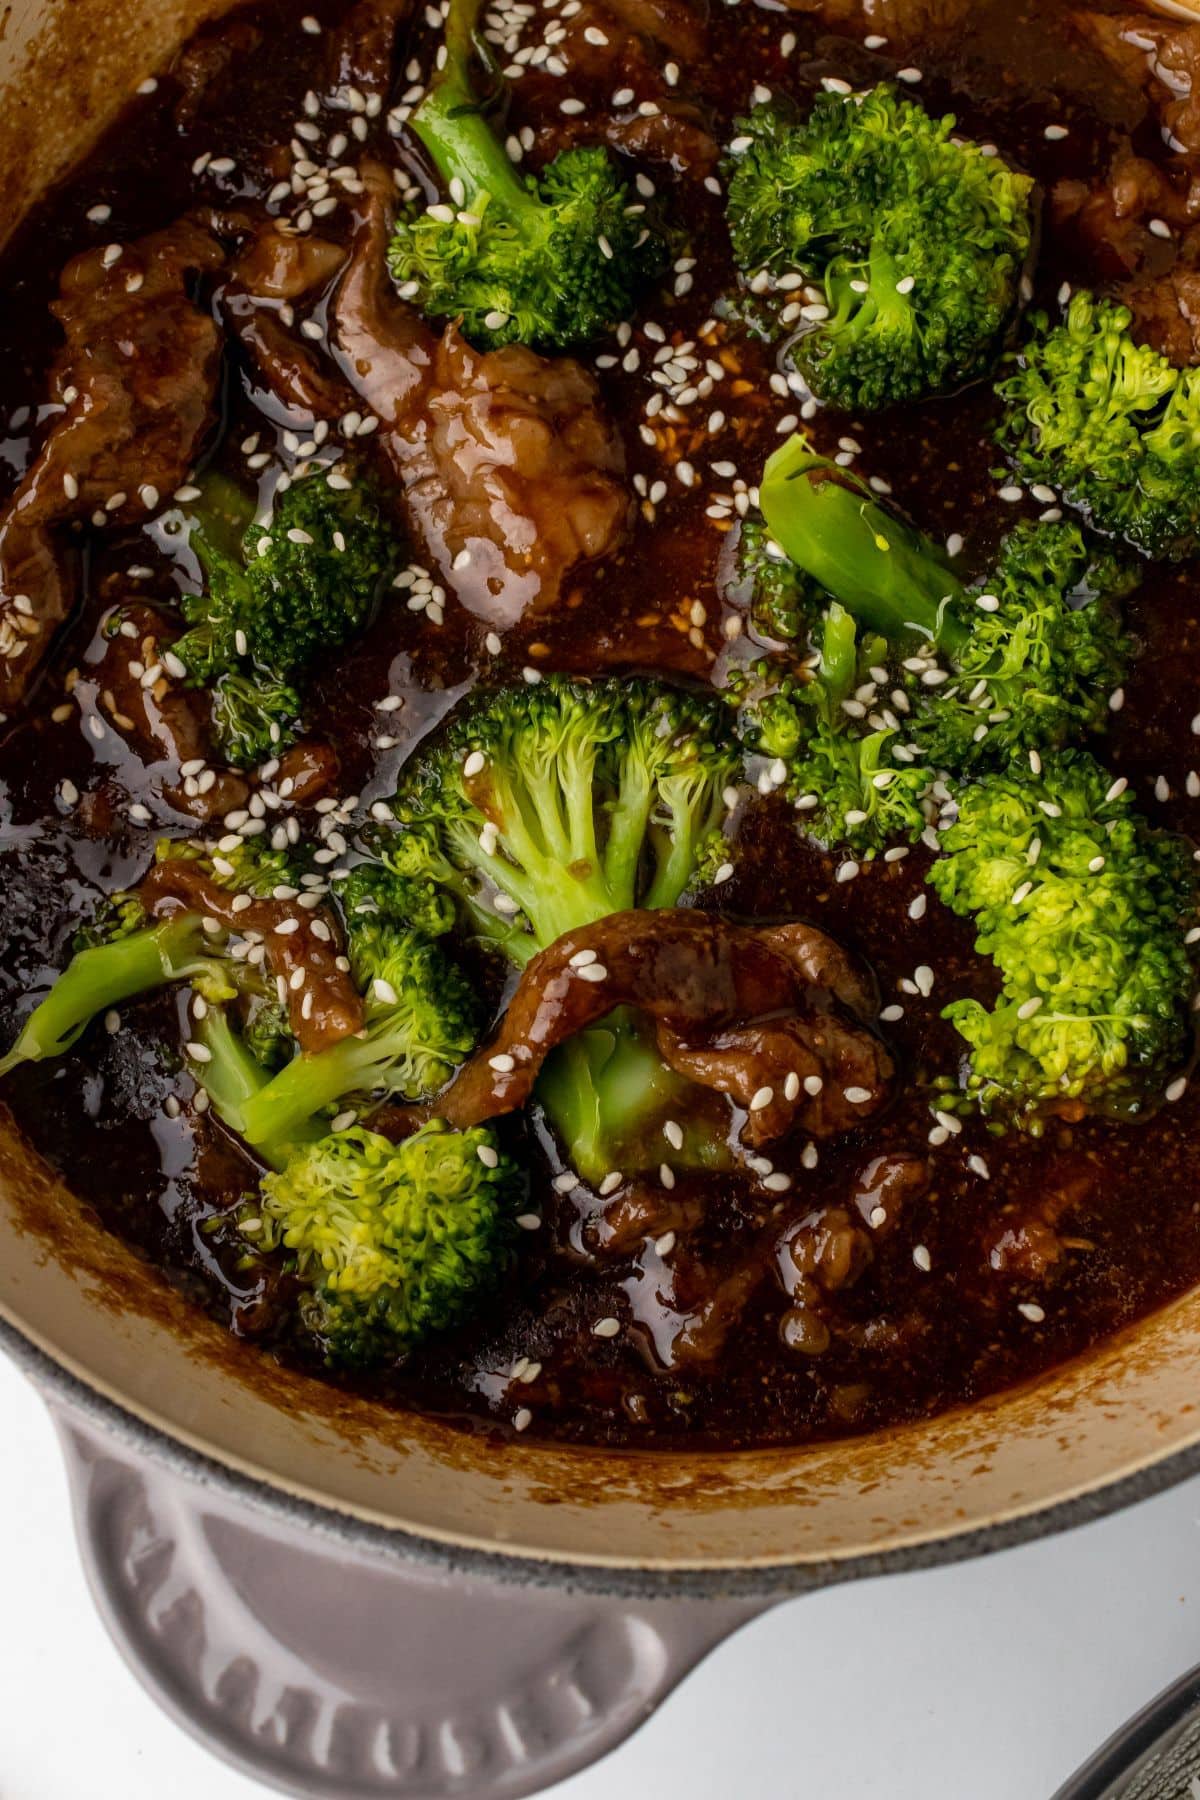 Beef and broccoli step 7